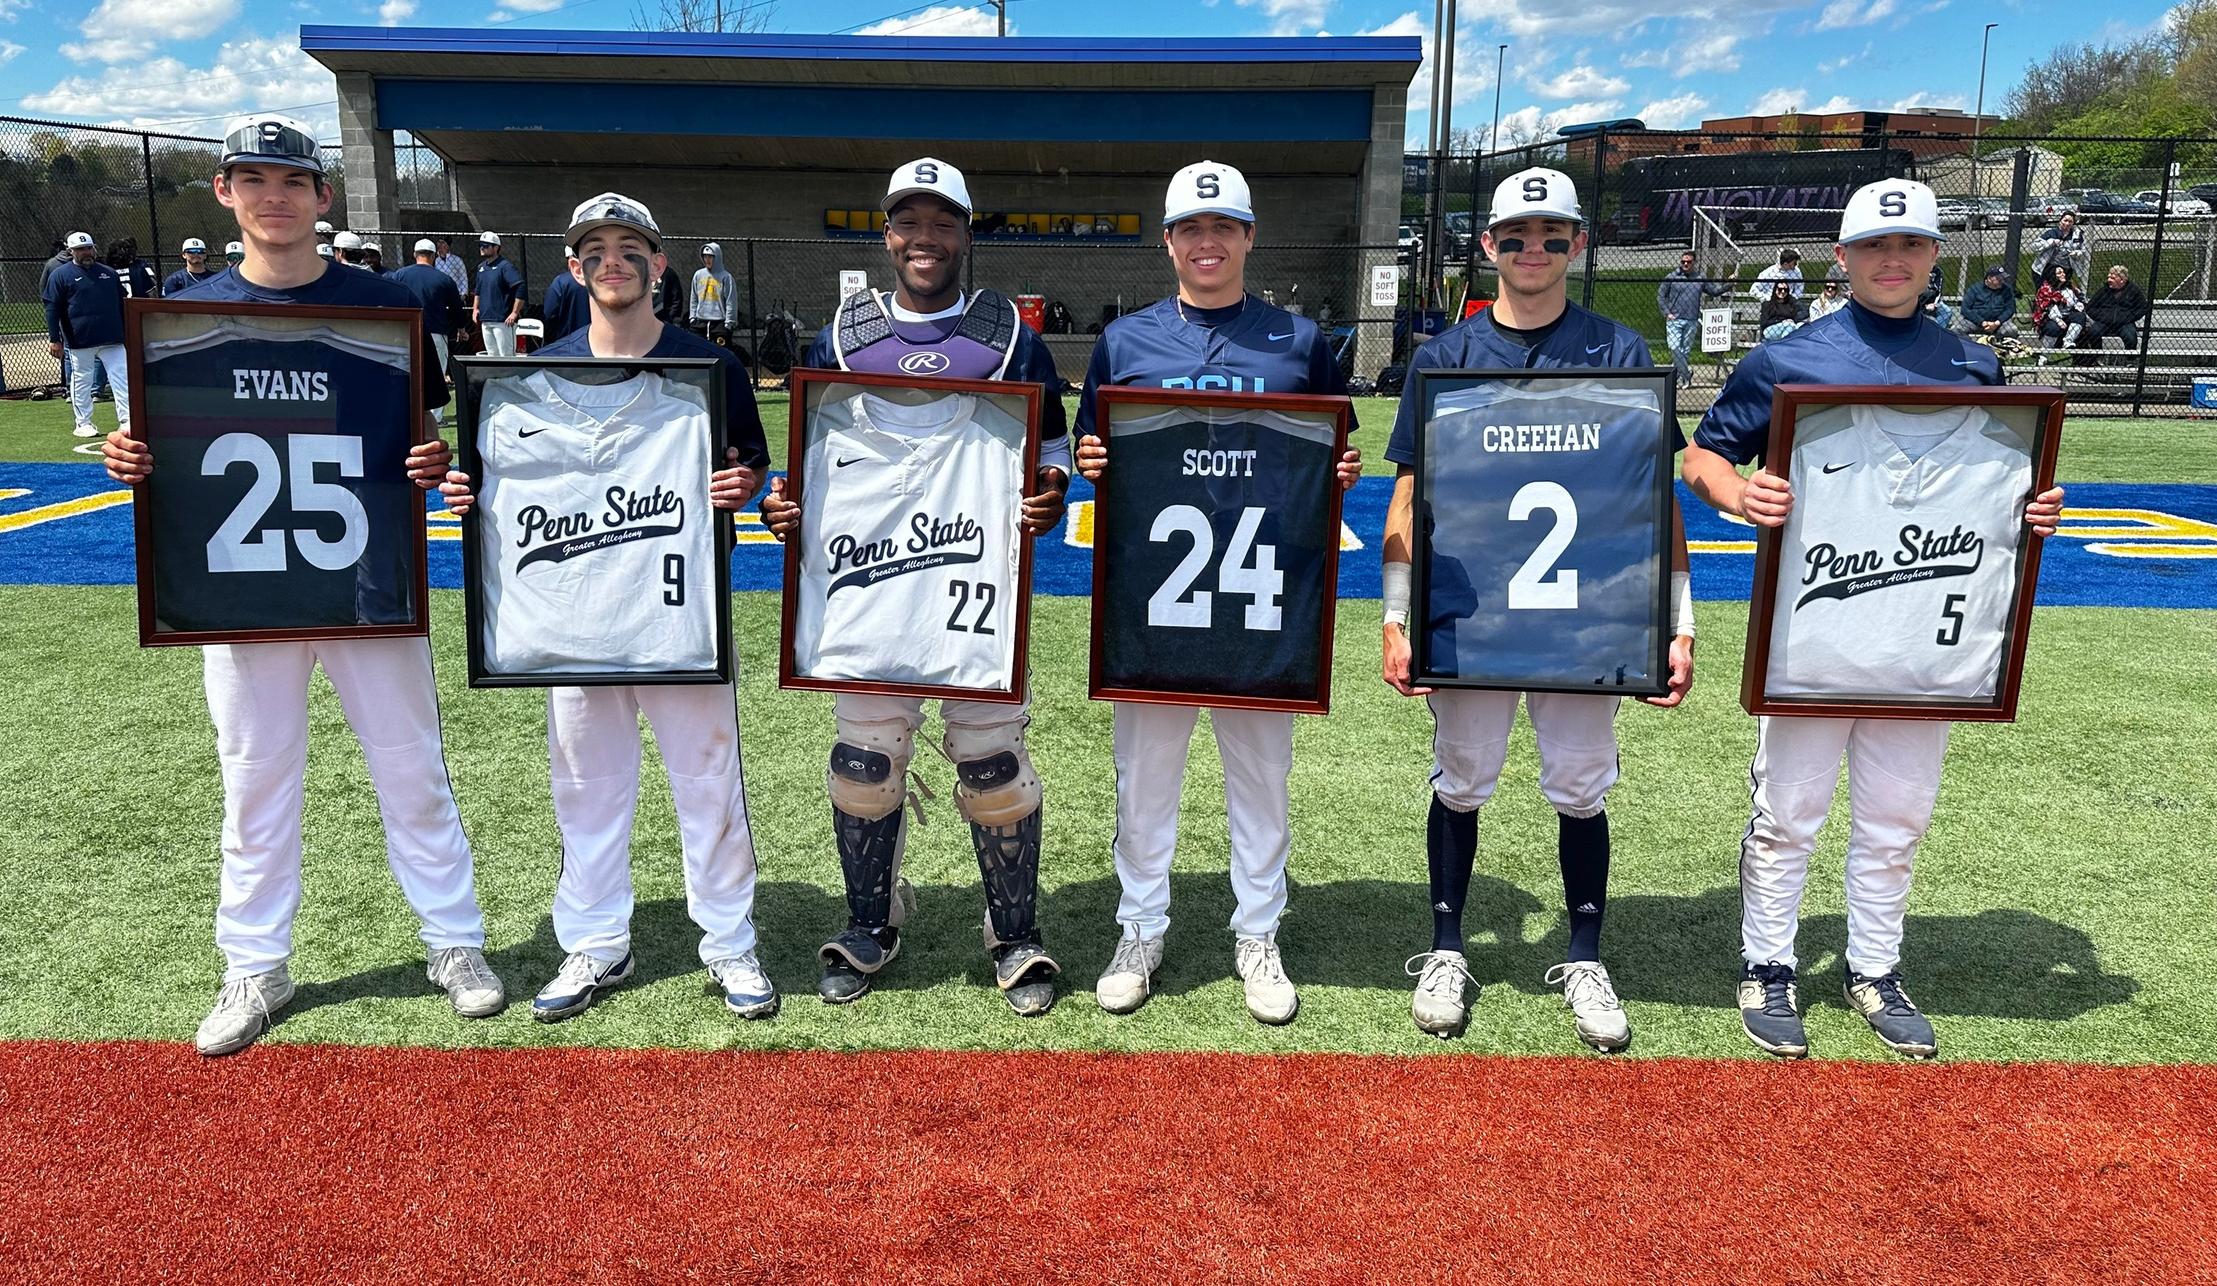 Baseball Honors Seniors with Strong Performance